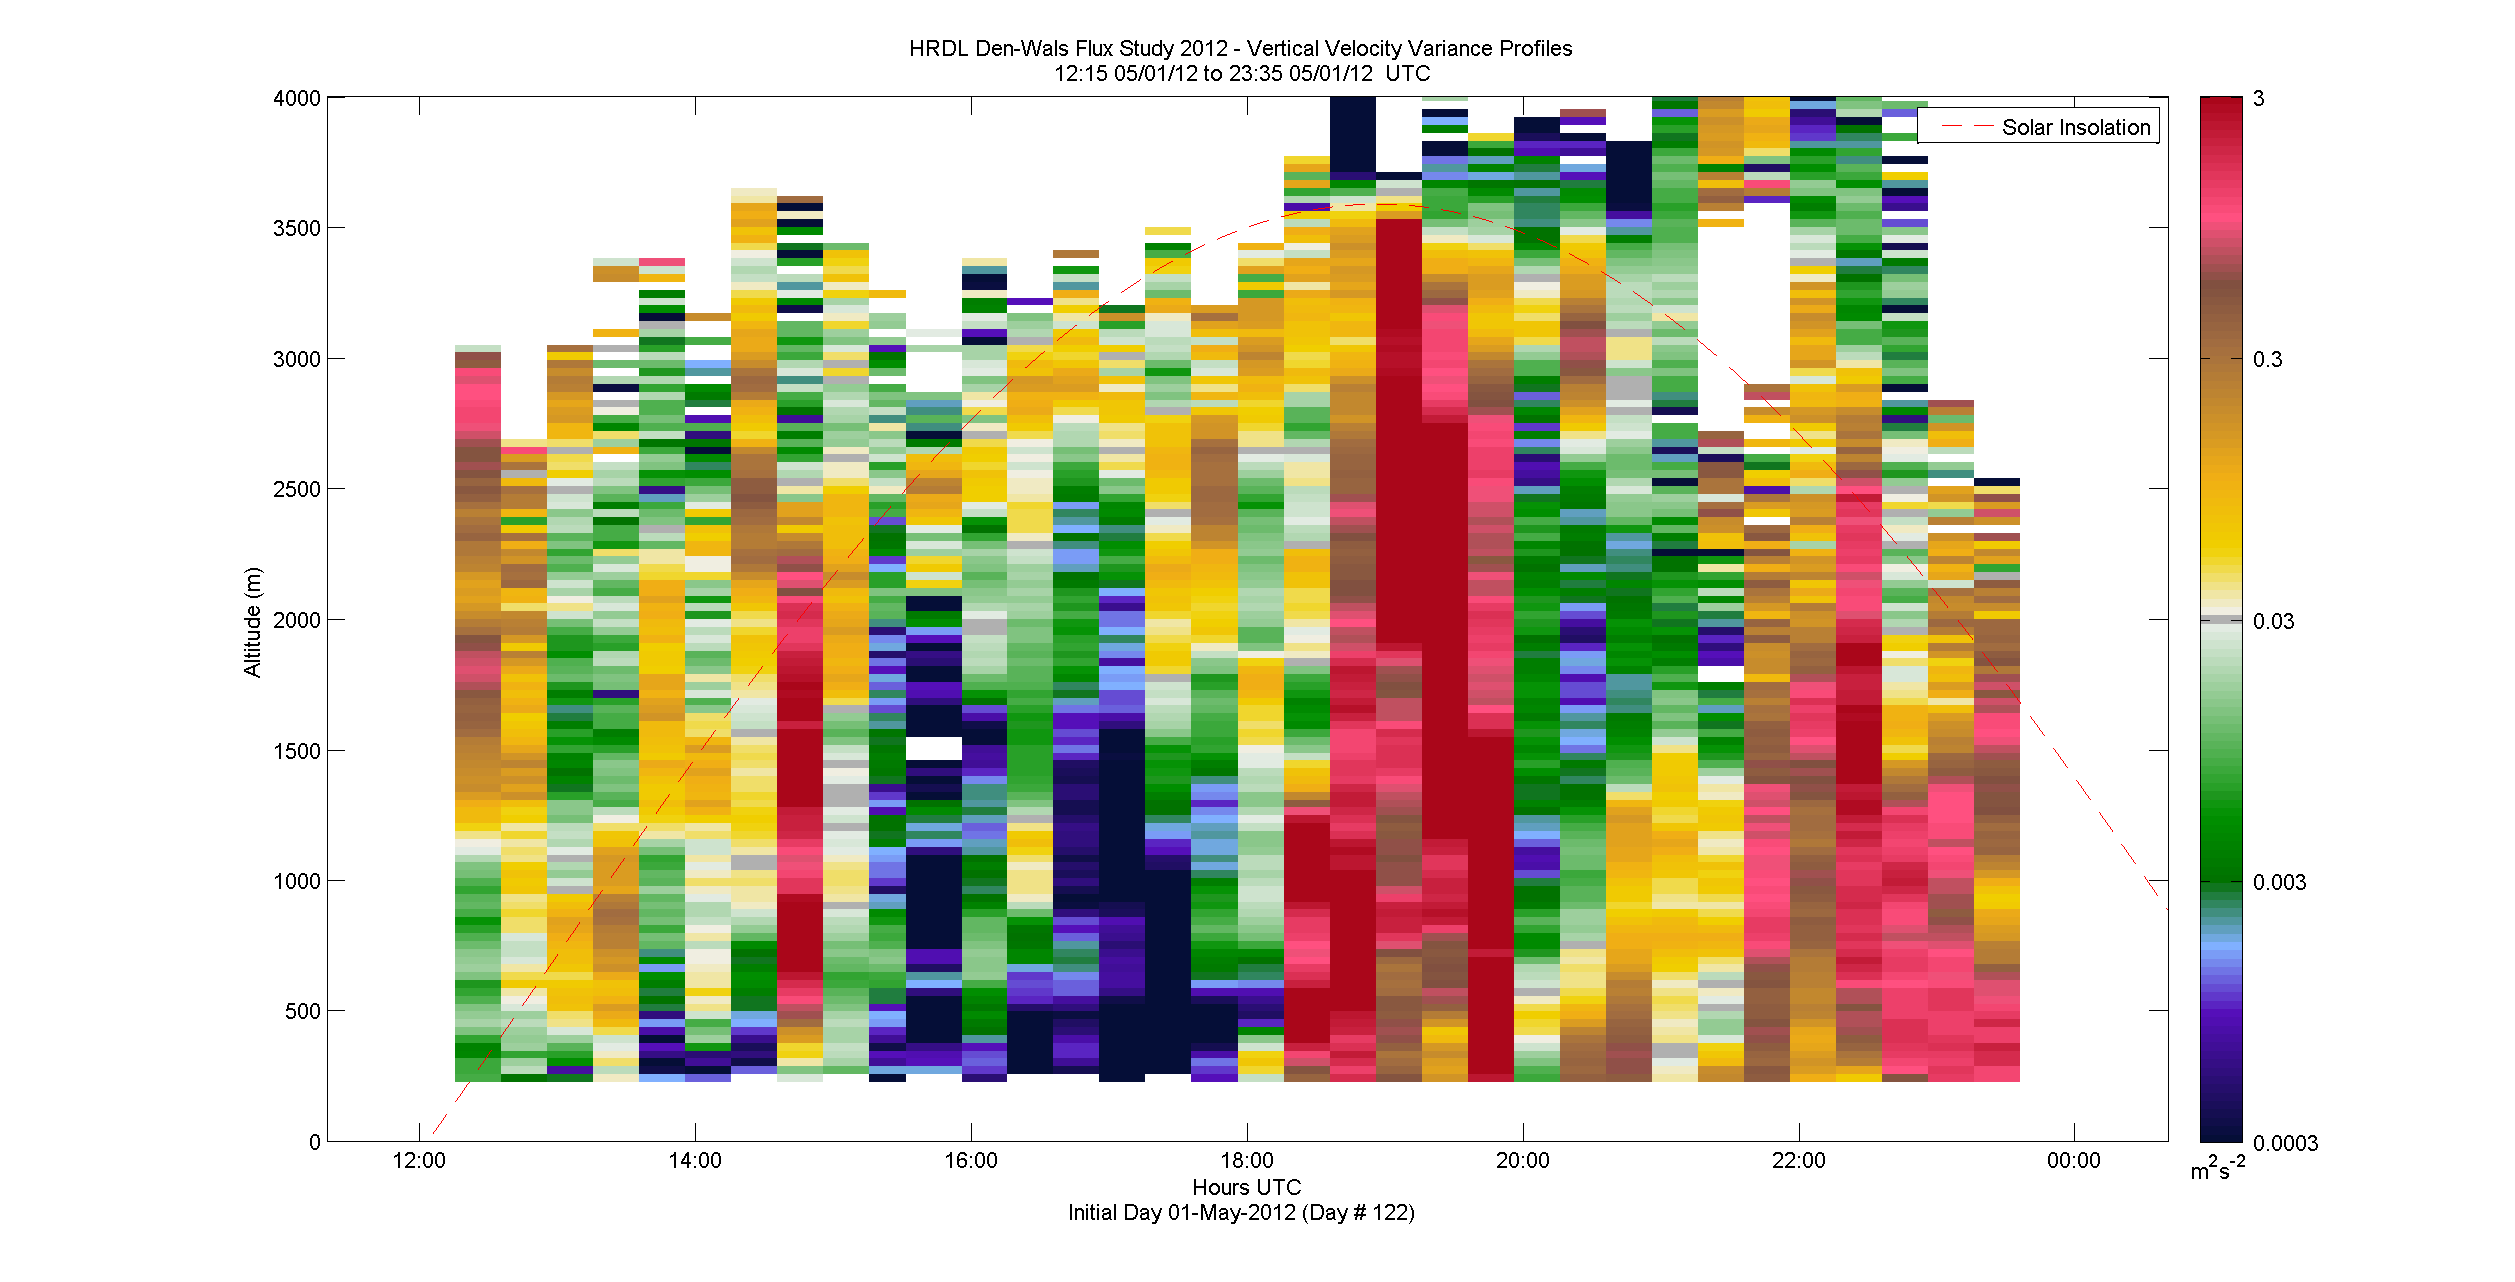 HRDL vertical variance profile - May 1 pm